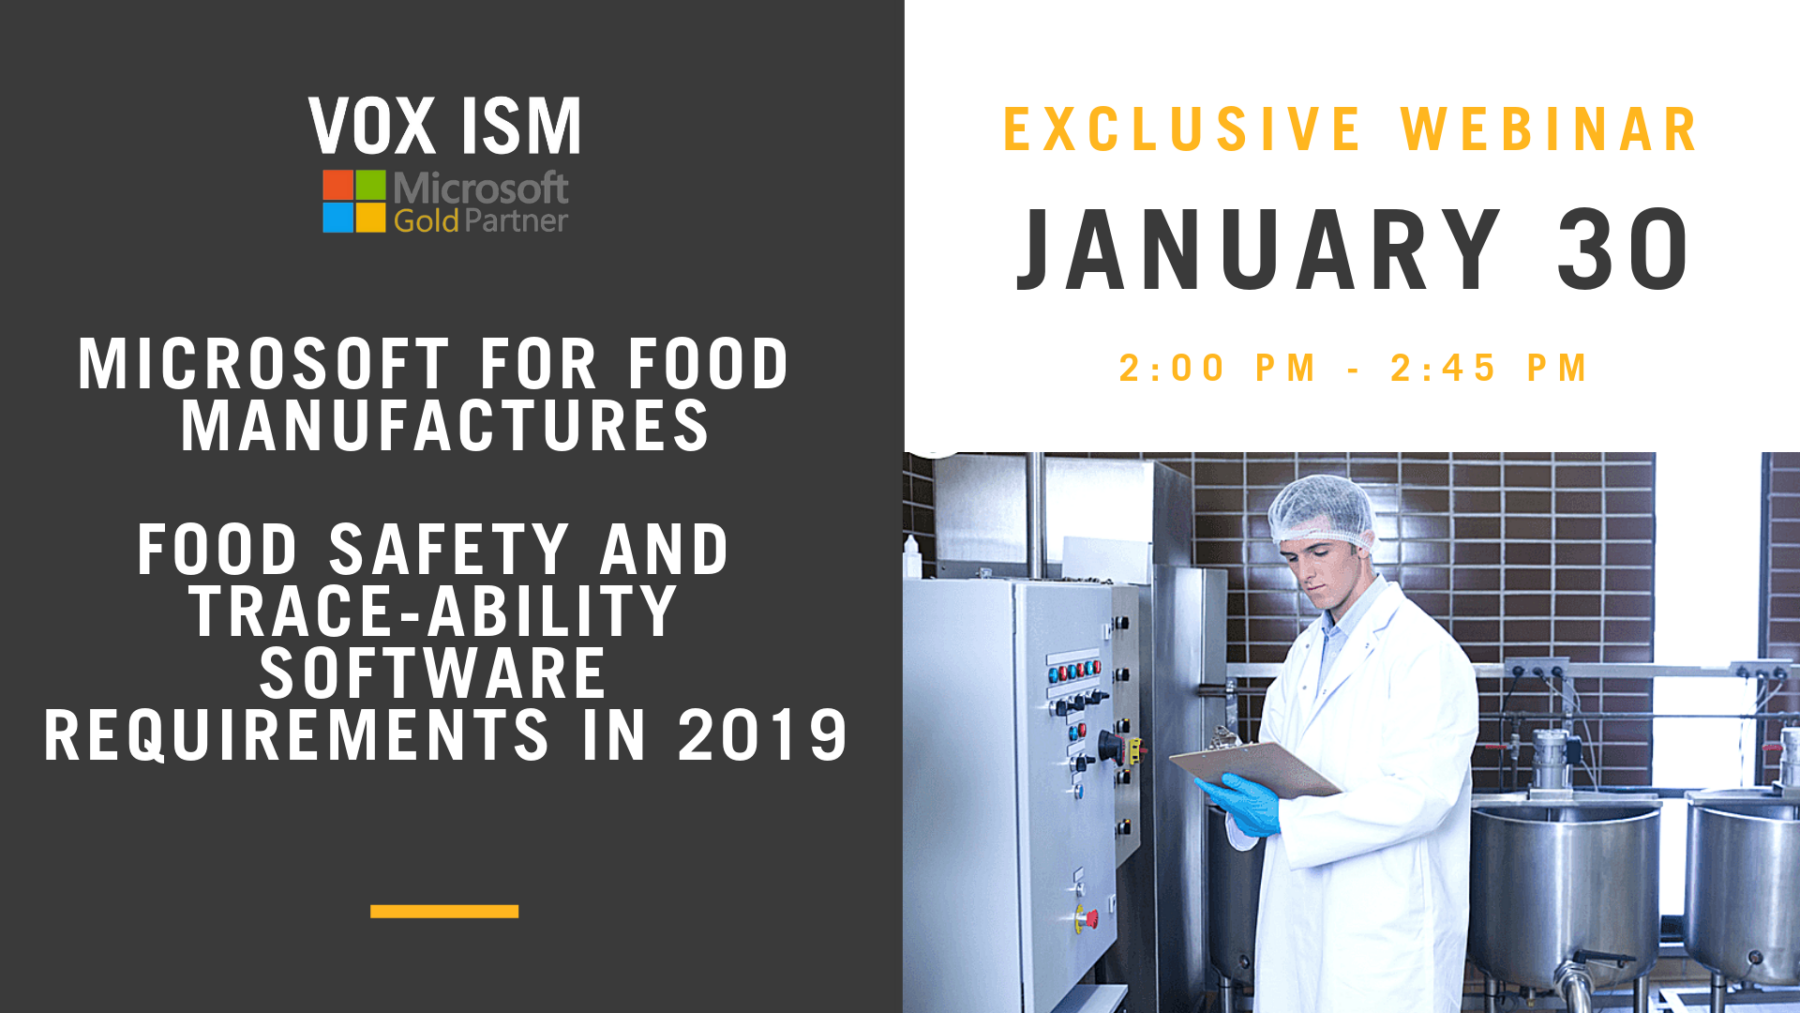 Food Safety and Trace-ability software requirements in 2019 - January 30 - Webinar